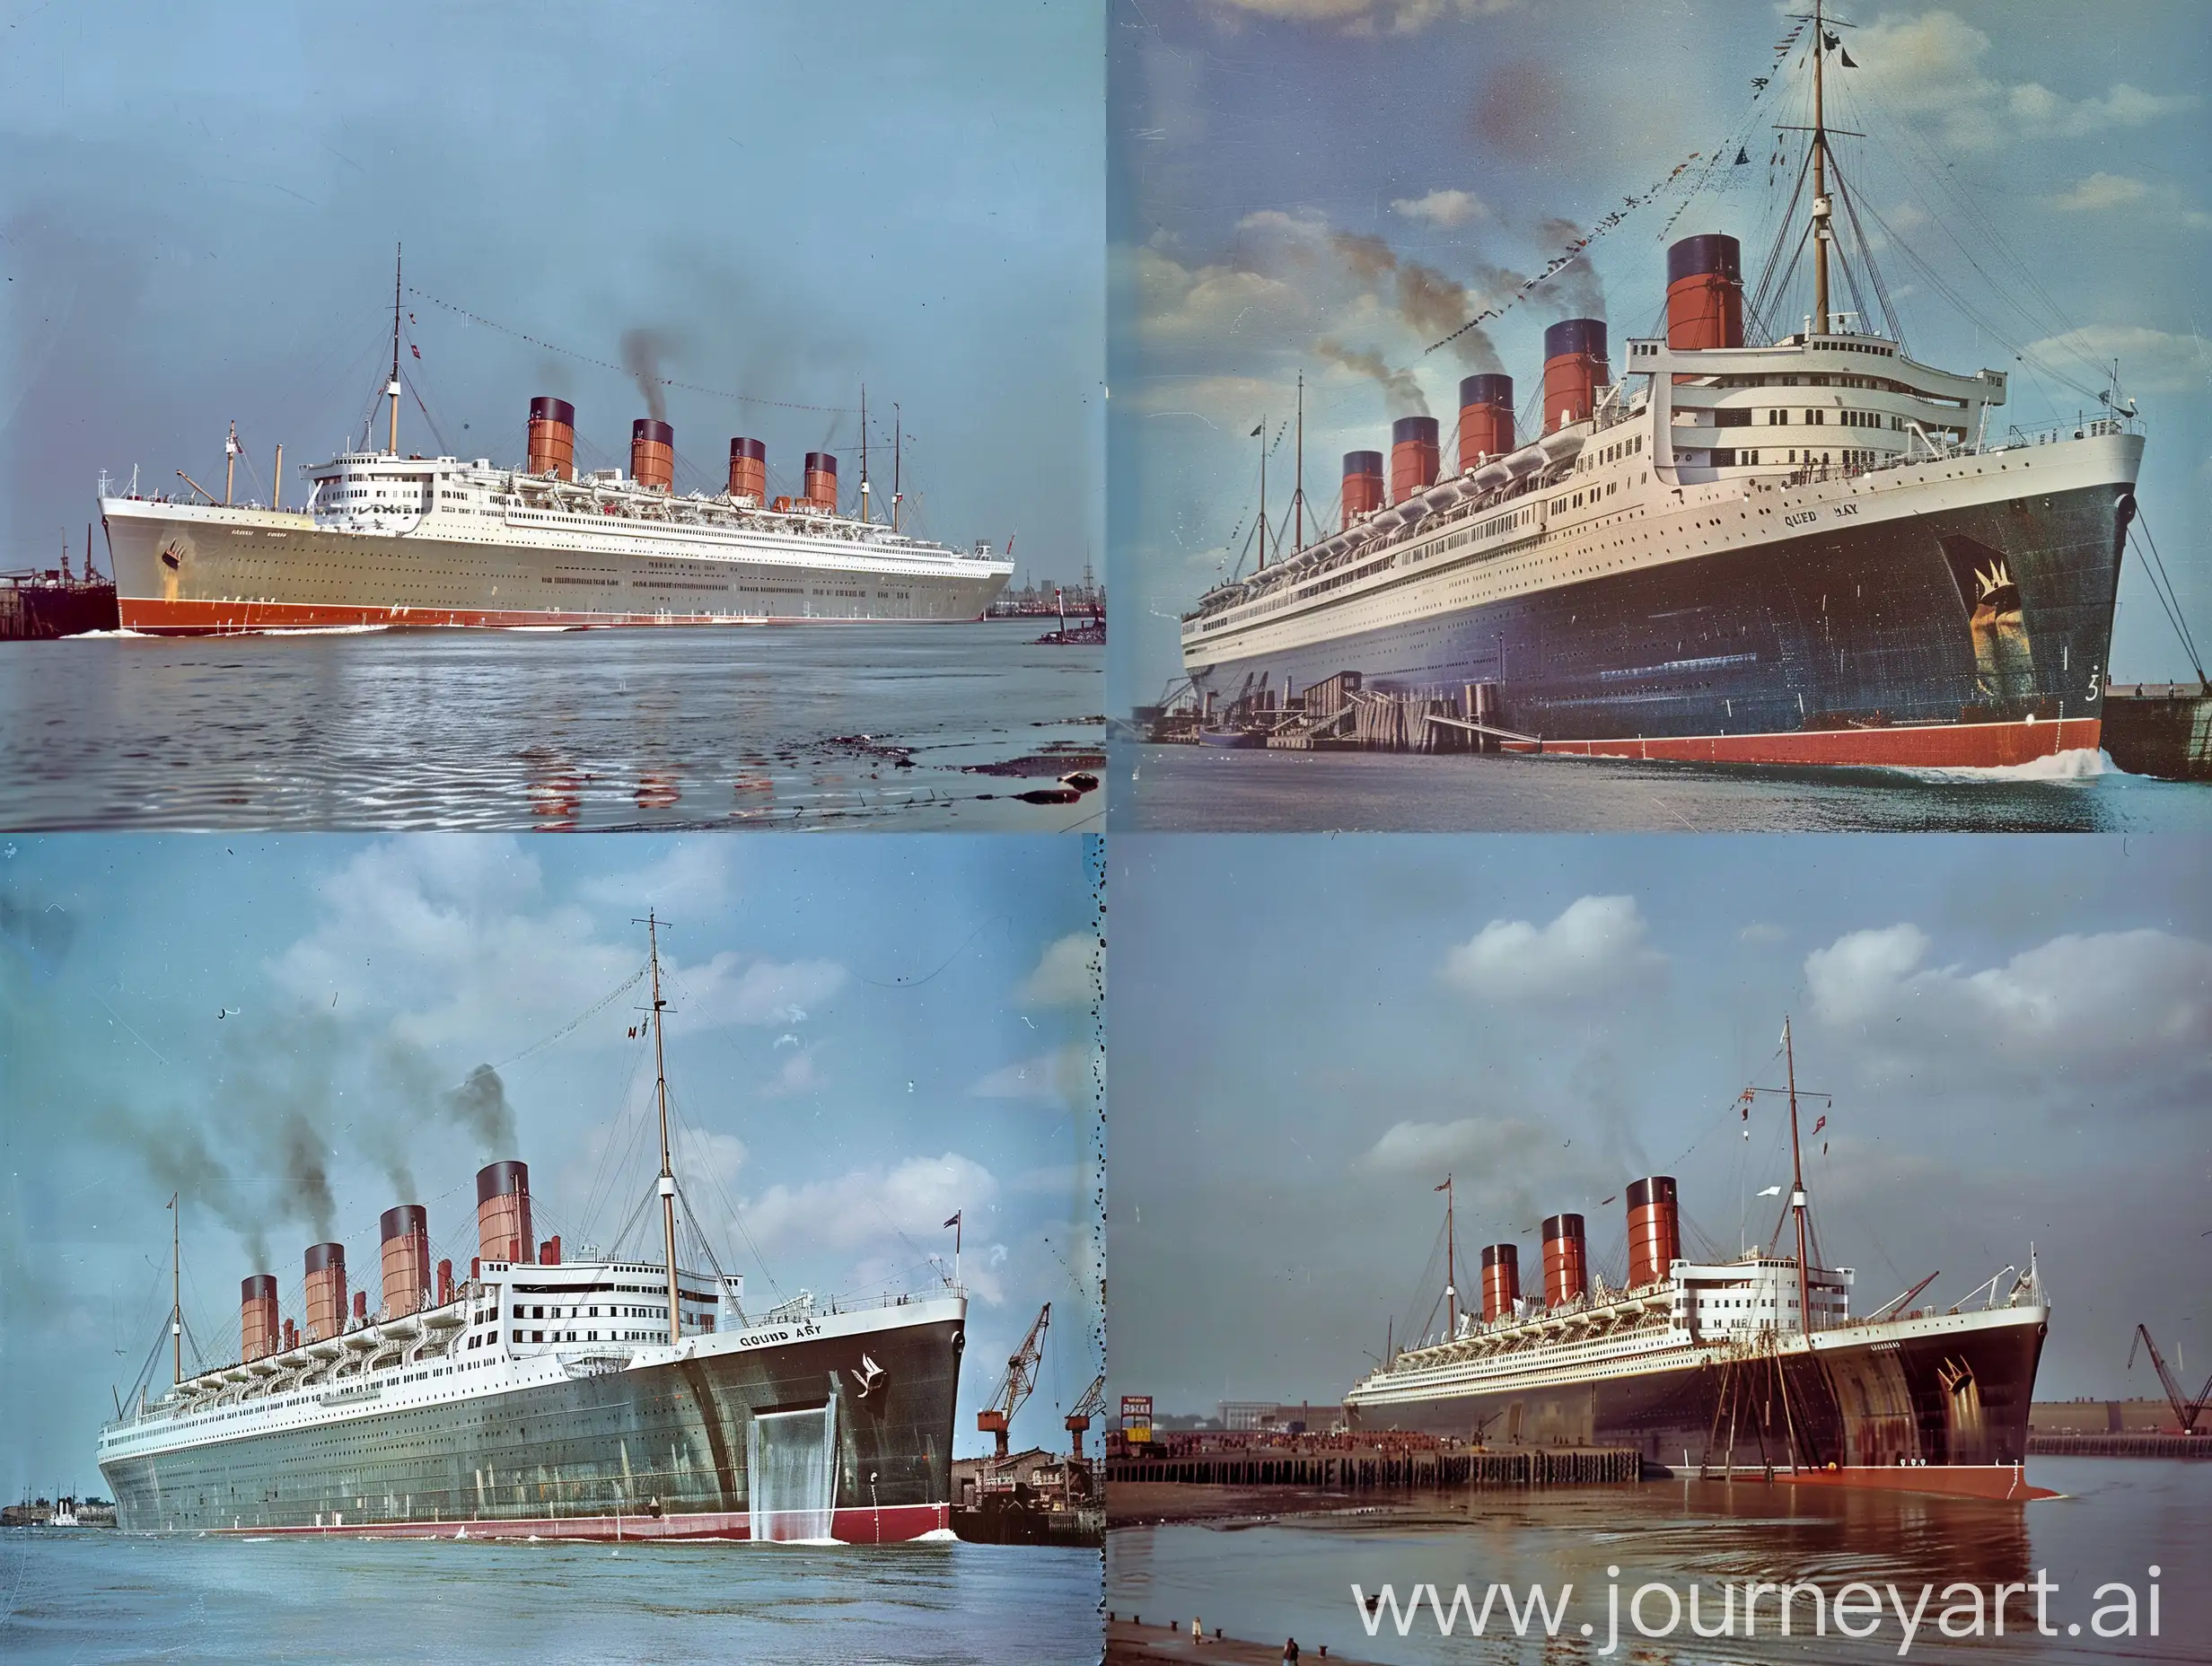 The British liner RMS Queen Mary, leaving a ship port, clan day time sky, color photograph, side view, profile pic of the ship, the ship only has three funnels, well deck on the bow, mast sitting on the forecastle, modern Hollywood Movie scene